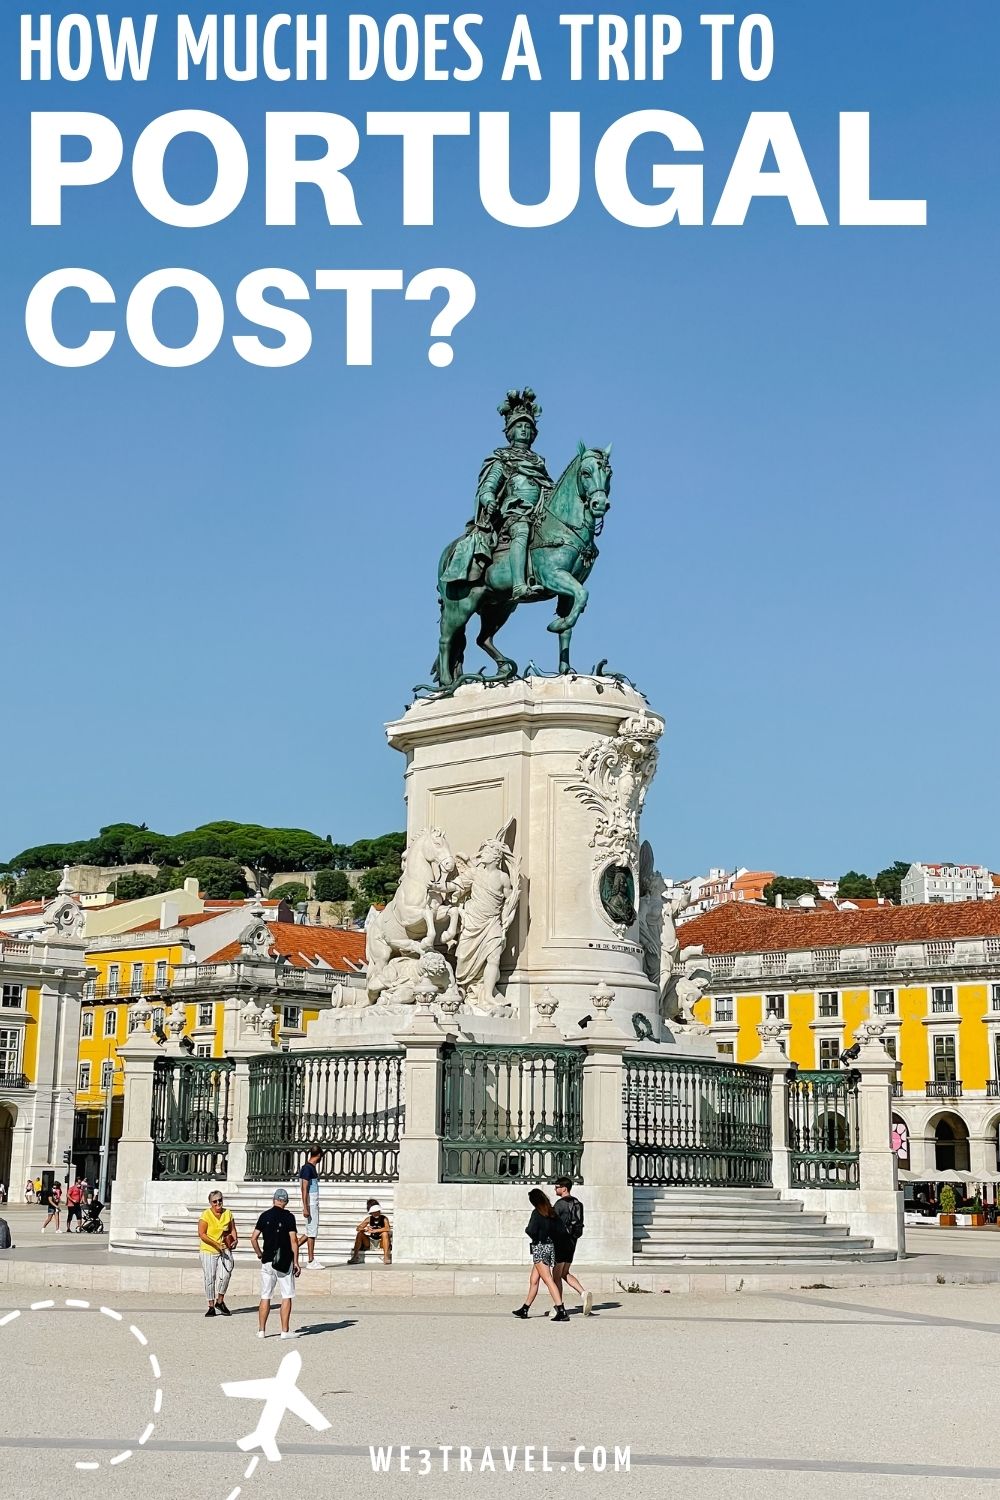 How much does a trip to Portugal cost